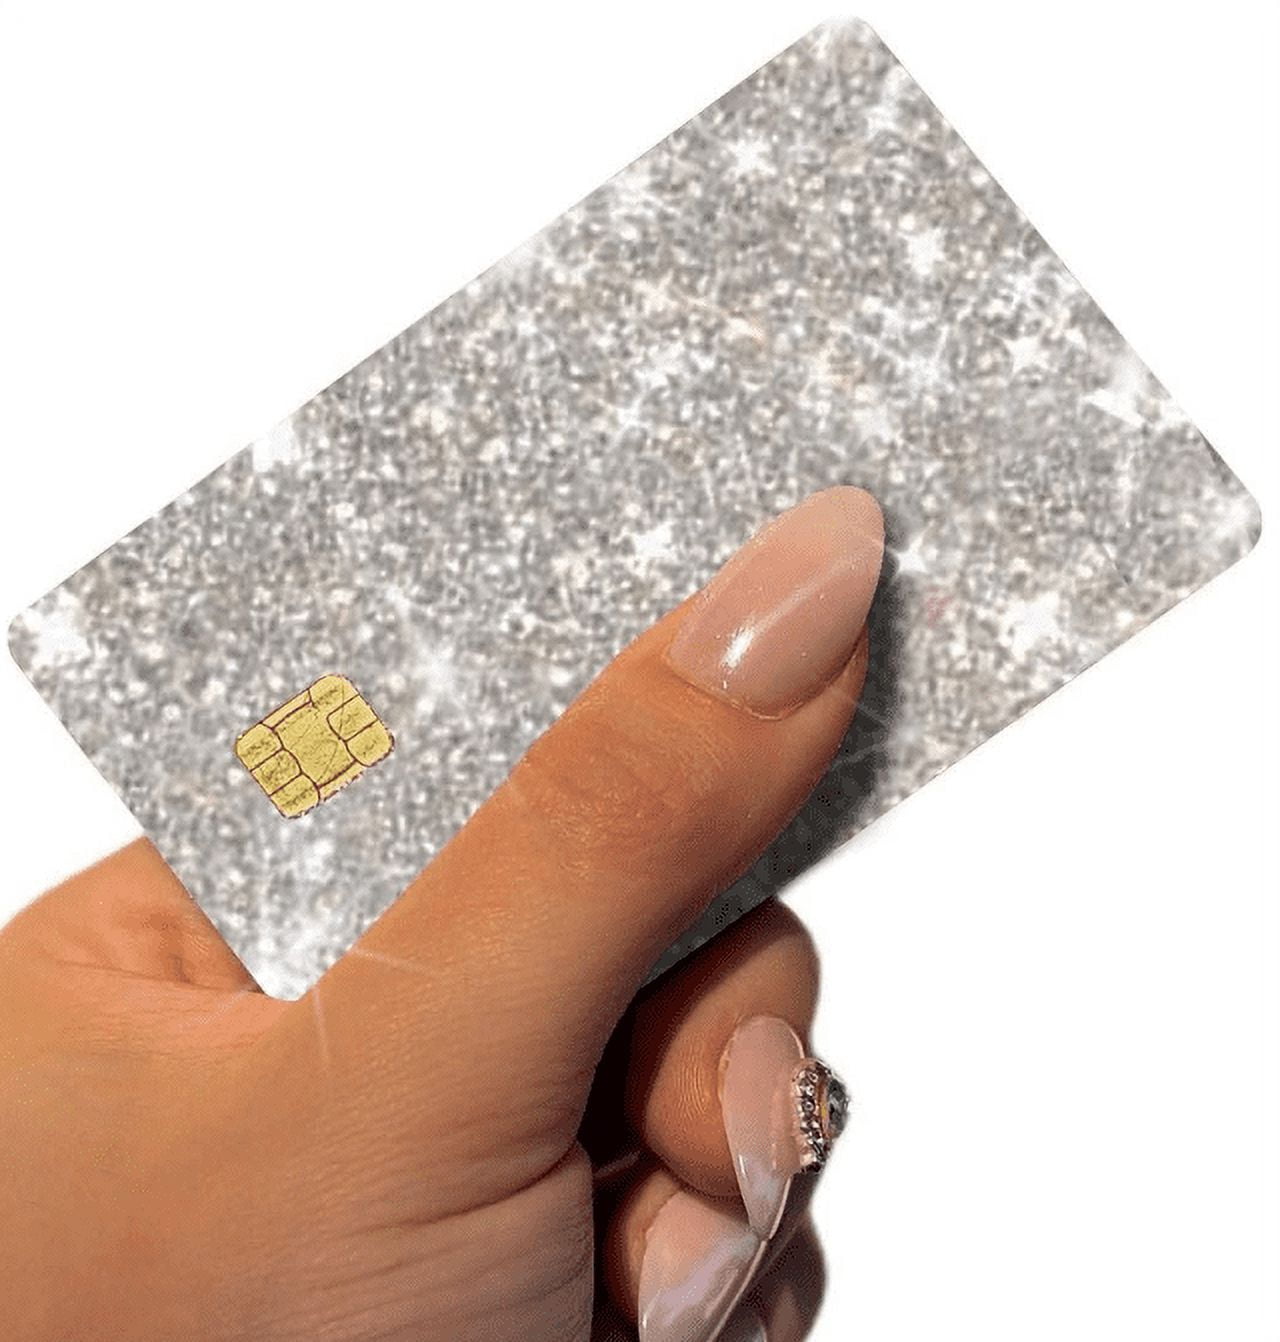 Sticker Shiny Ultra Bling Removable Debit - Credit Card Skin Cover Specially Bright Back Information, Protecting and Personalizing Bank Card - No